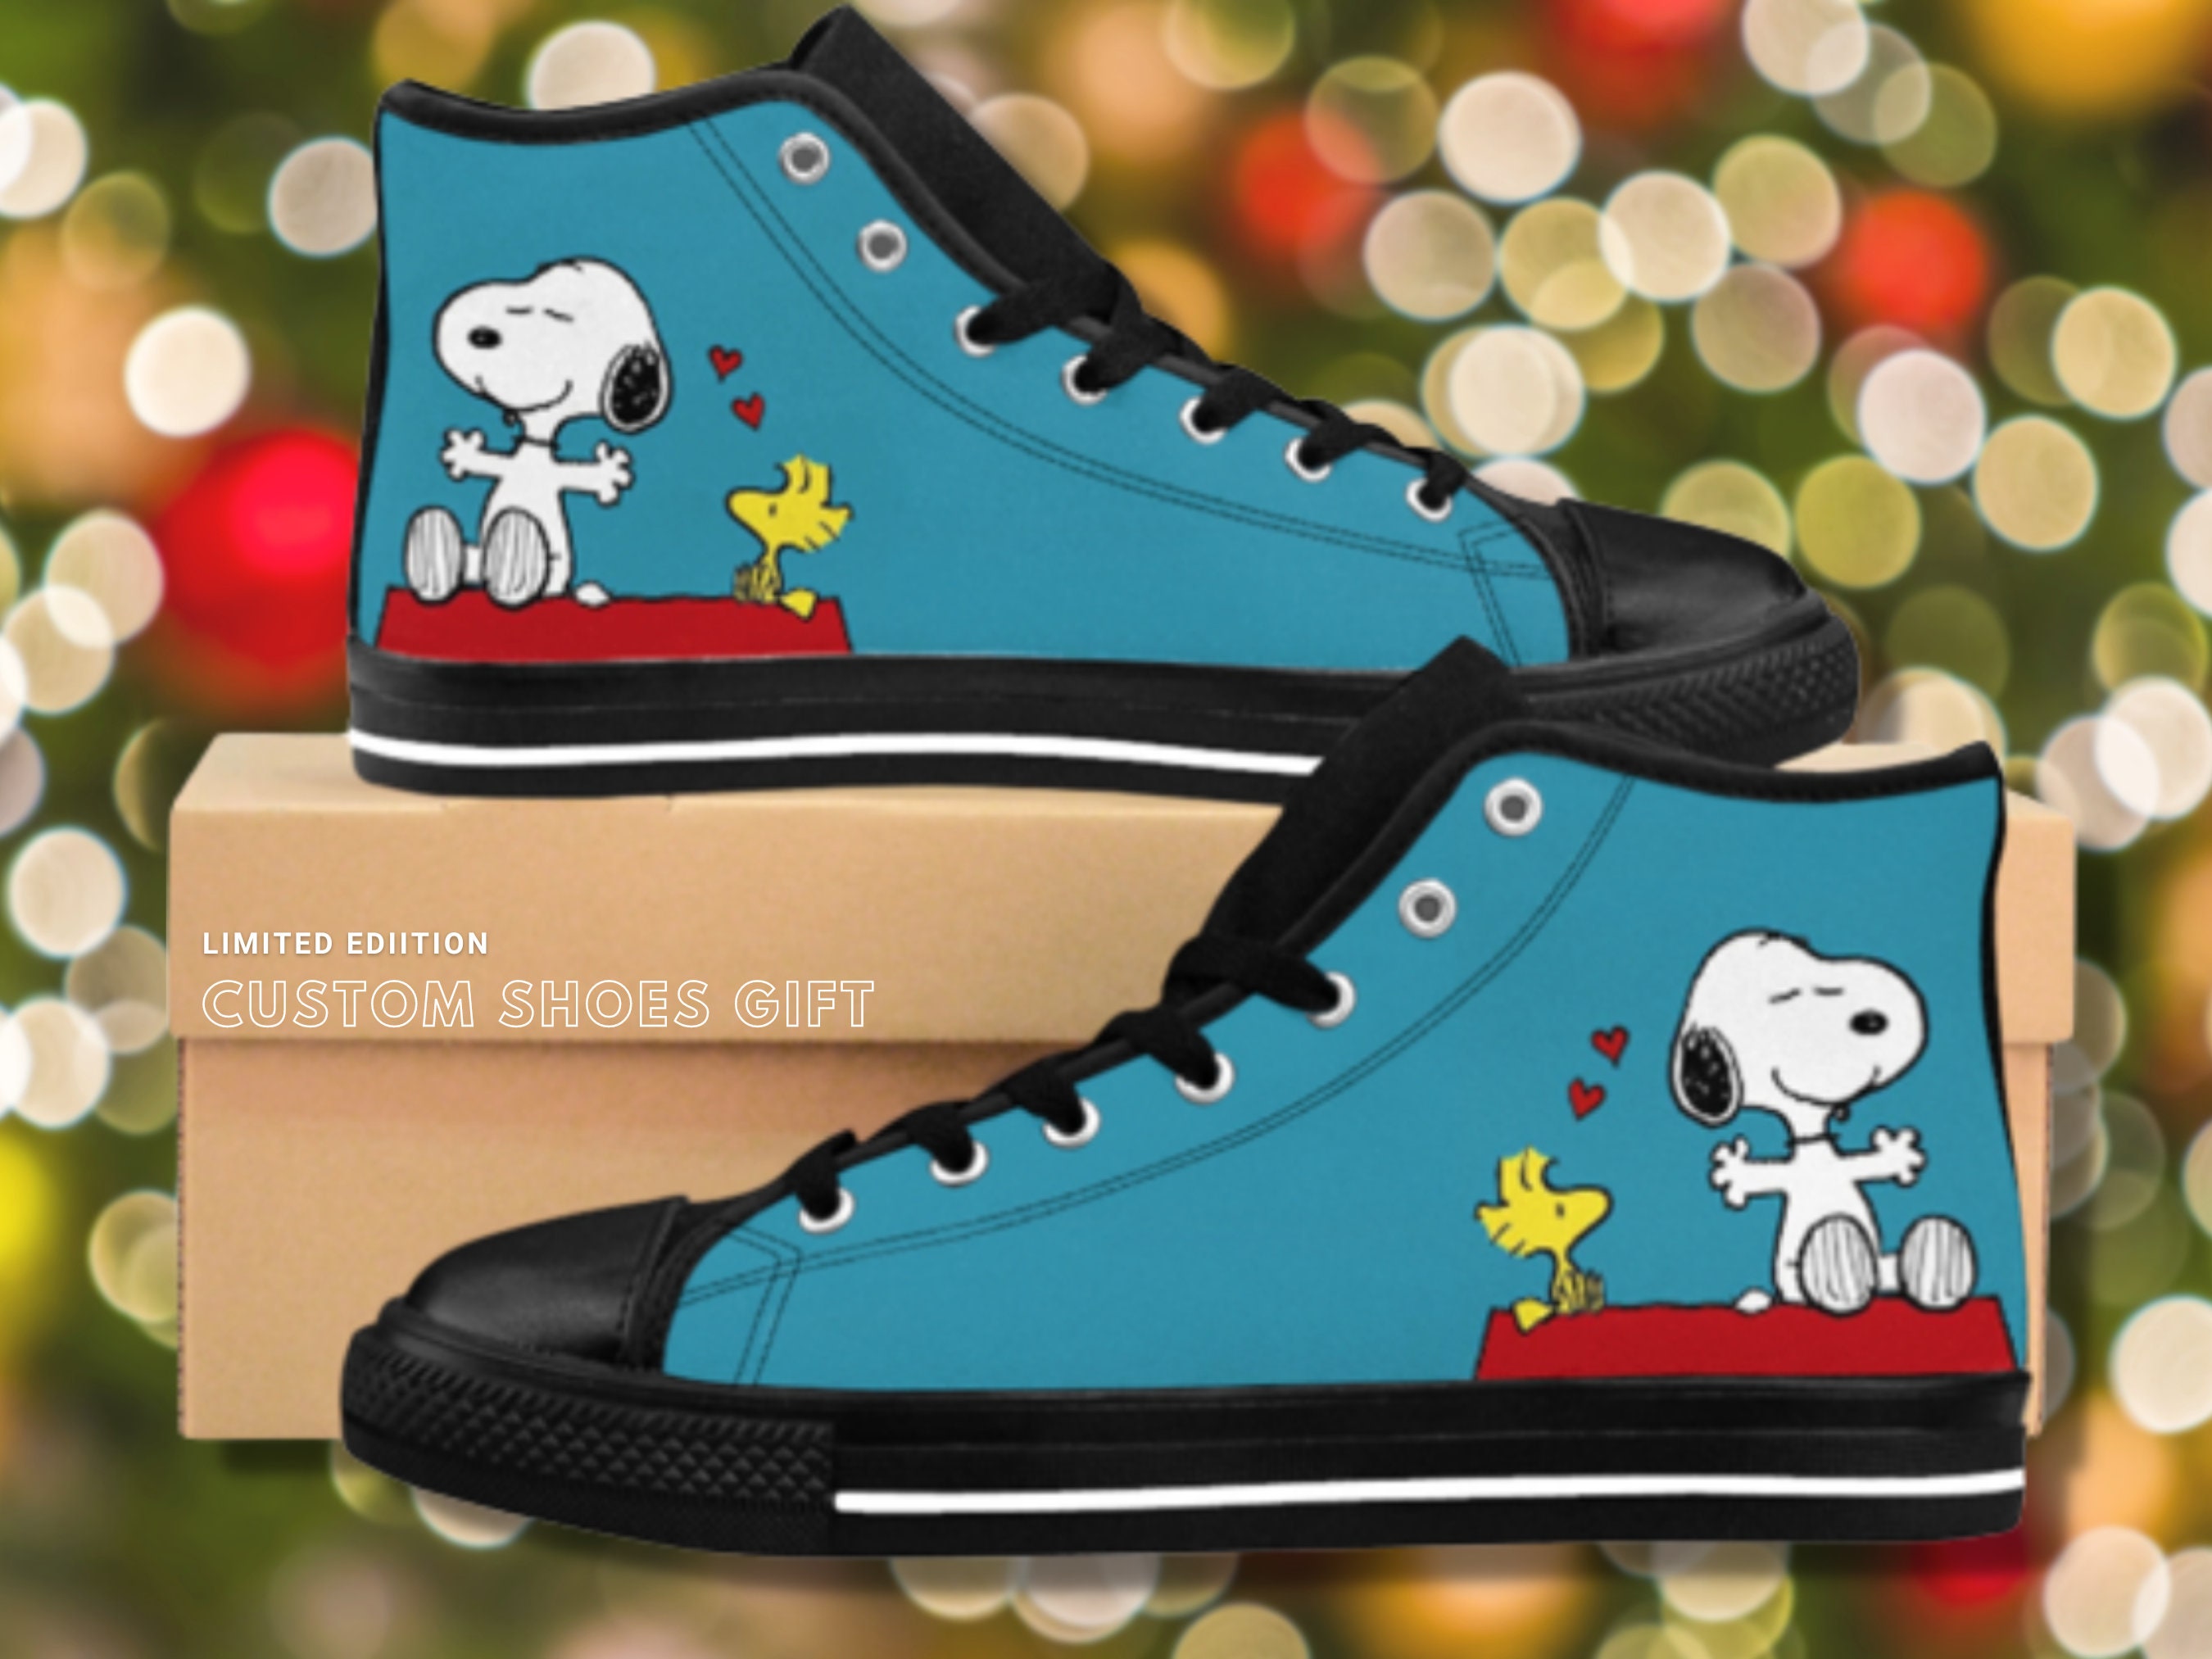 Snoopy shoes, Snoopy christmas gift, Snoopy sneakers, Snoopy gifts